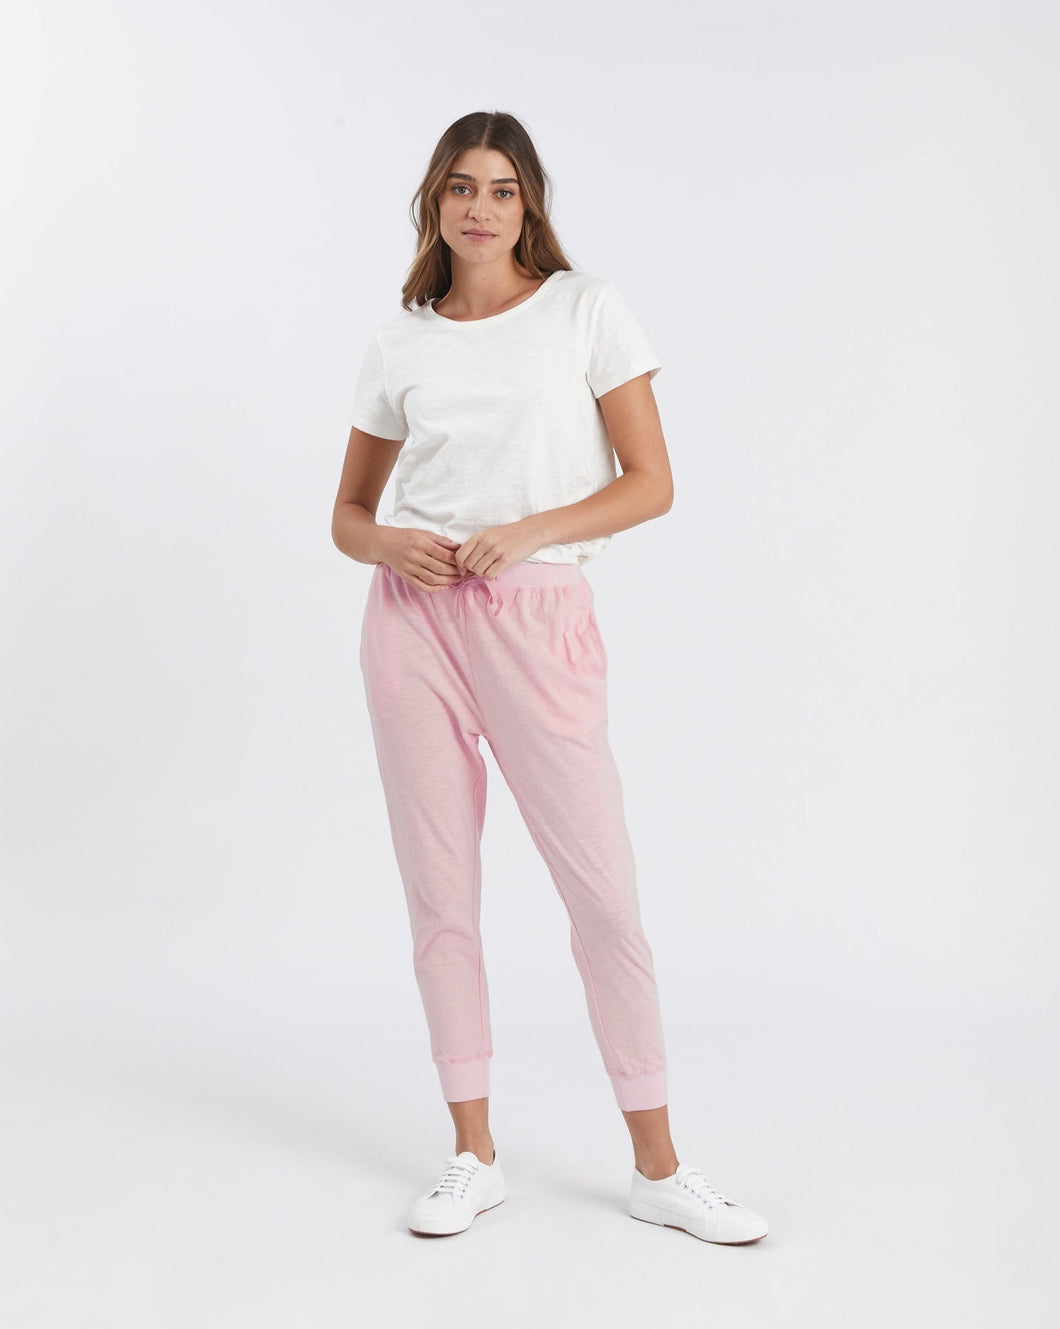 Blossom Naomi Pant by Crue the Label